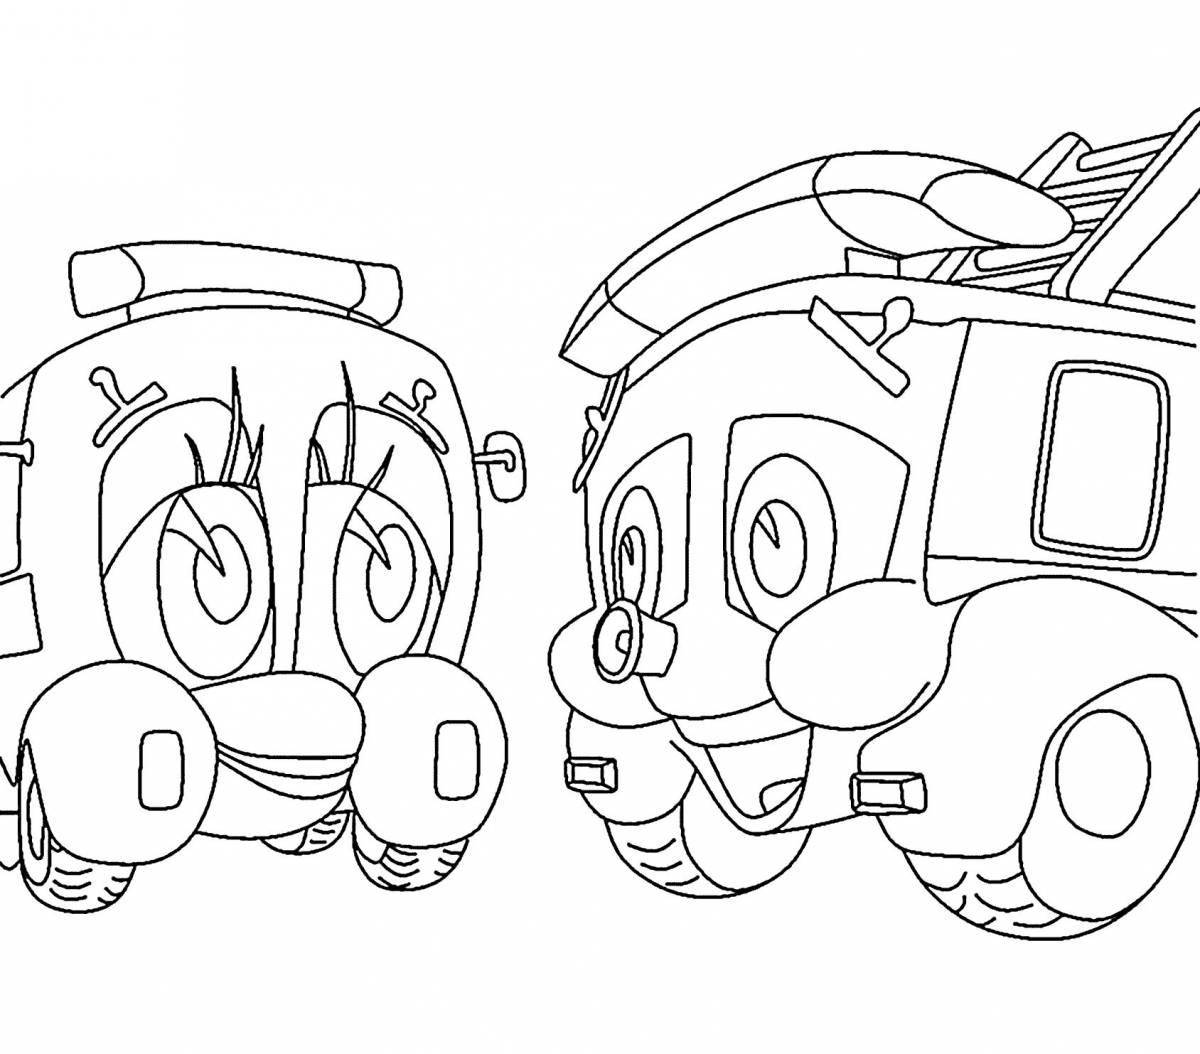 Coloring page nice ray and the fire patrol